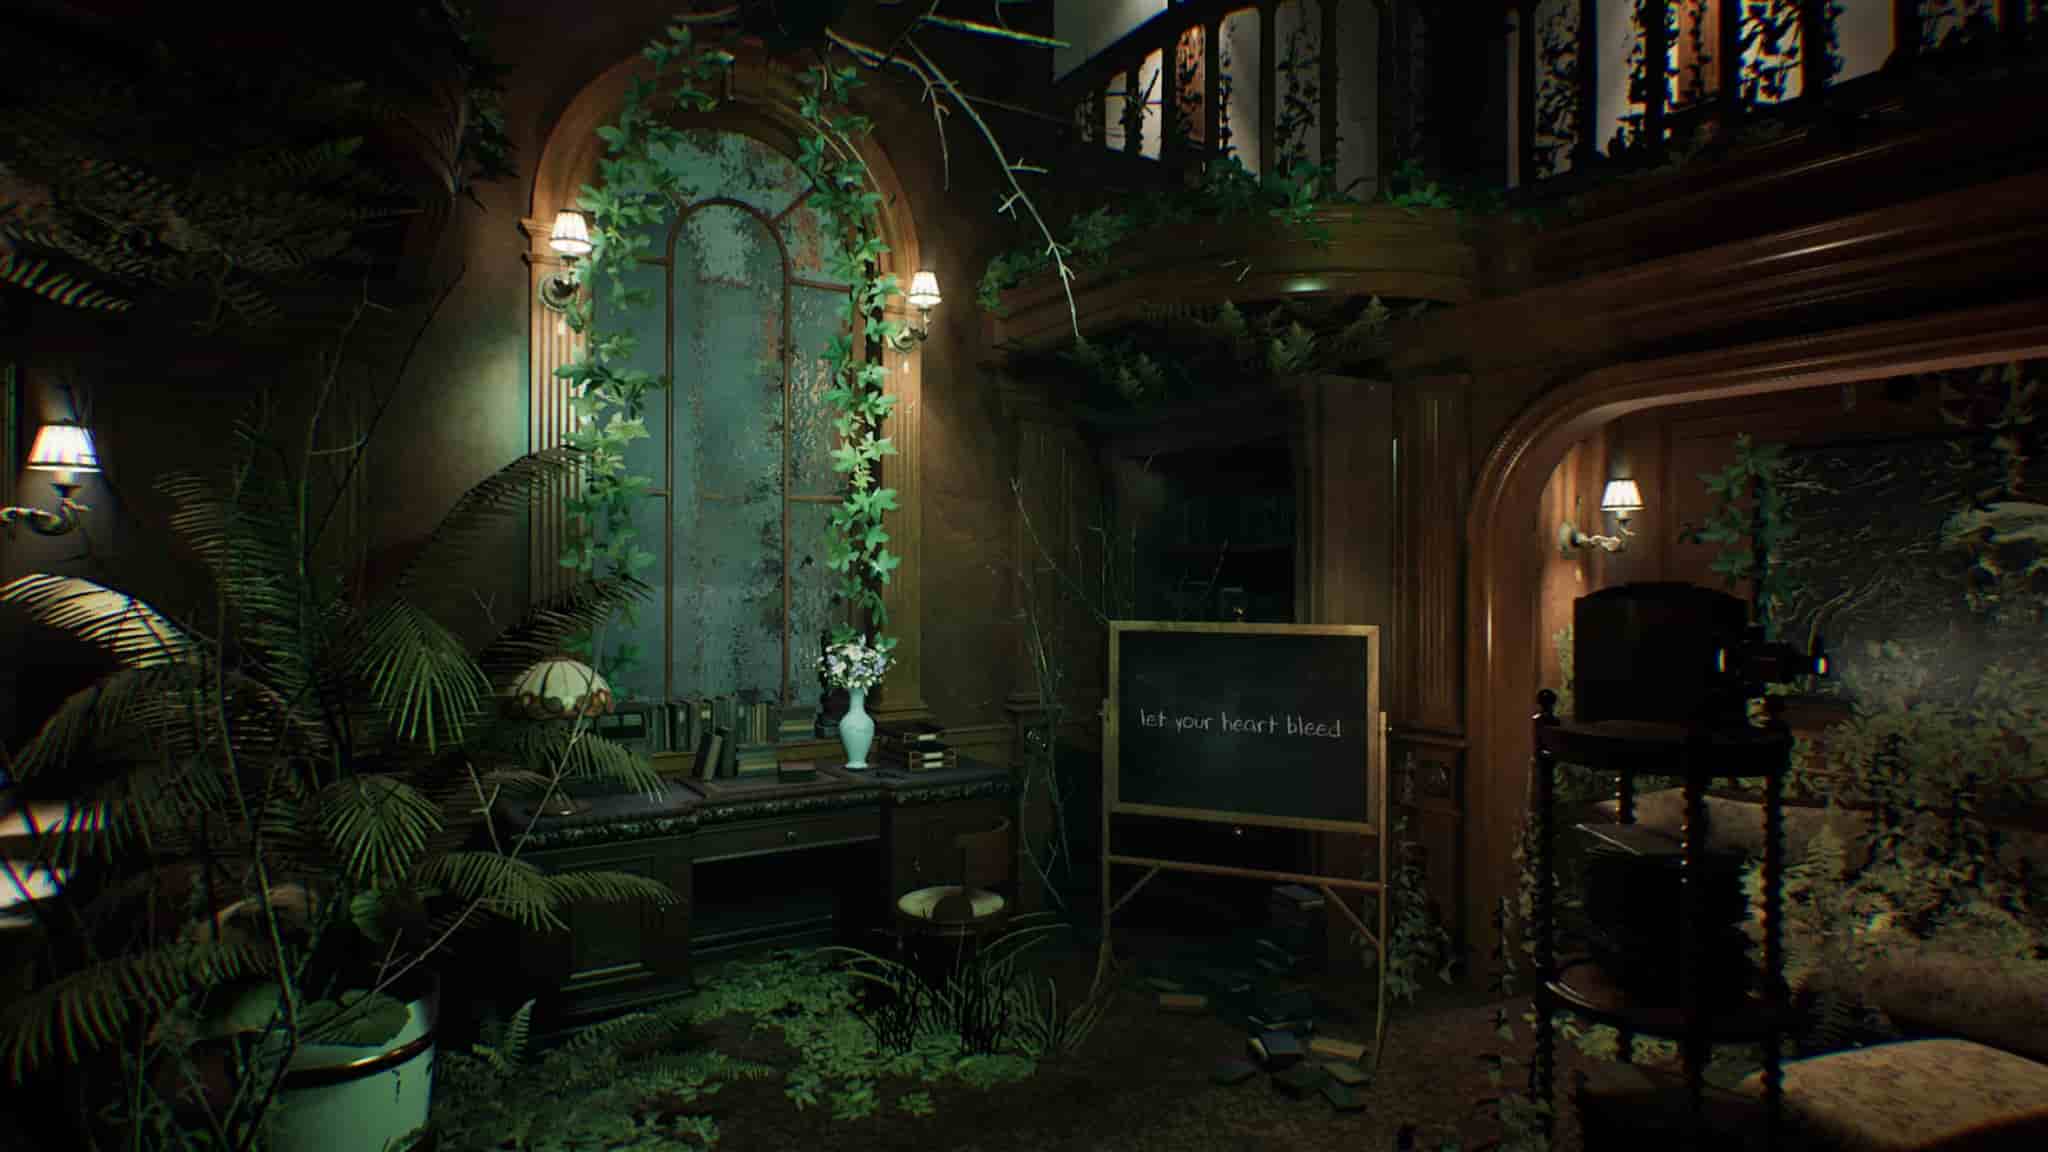 Layers of Fear: Inheritance DLC PS4 Review - PlayStation Universe